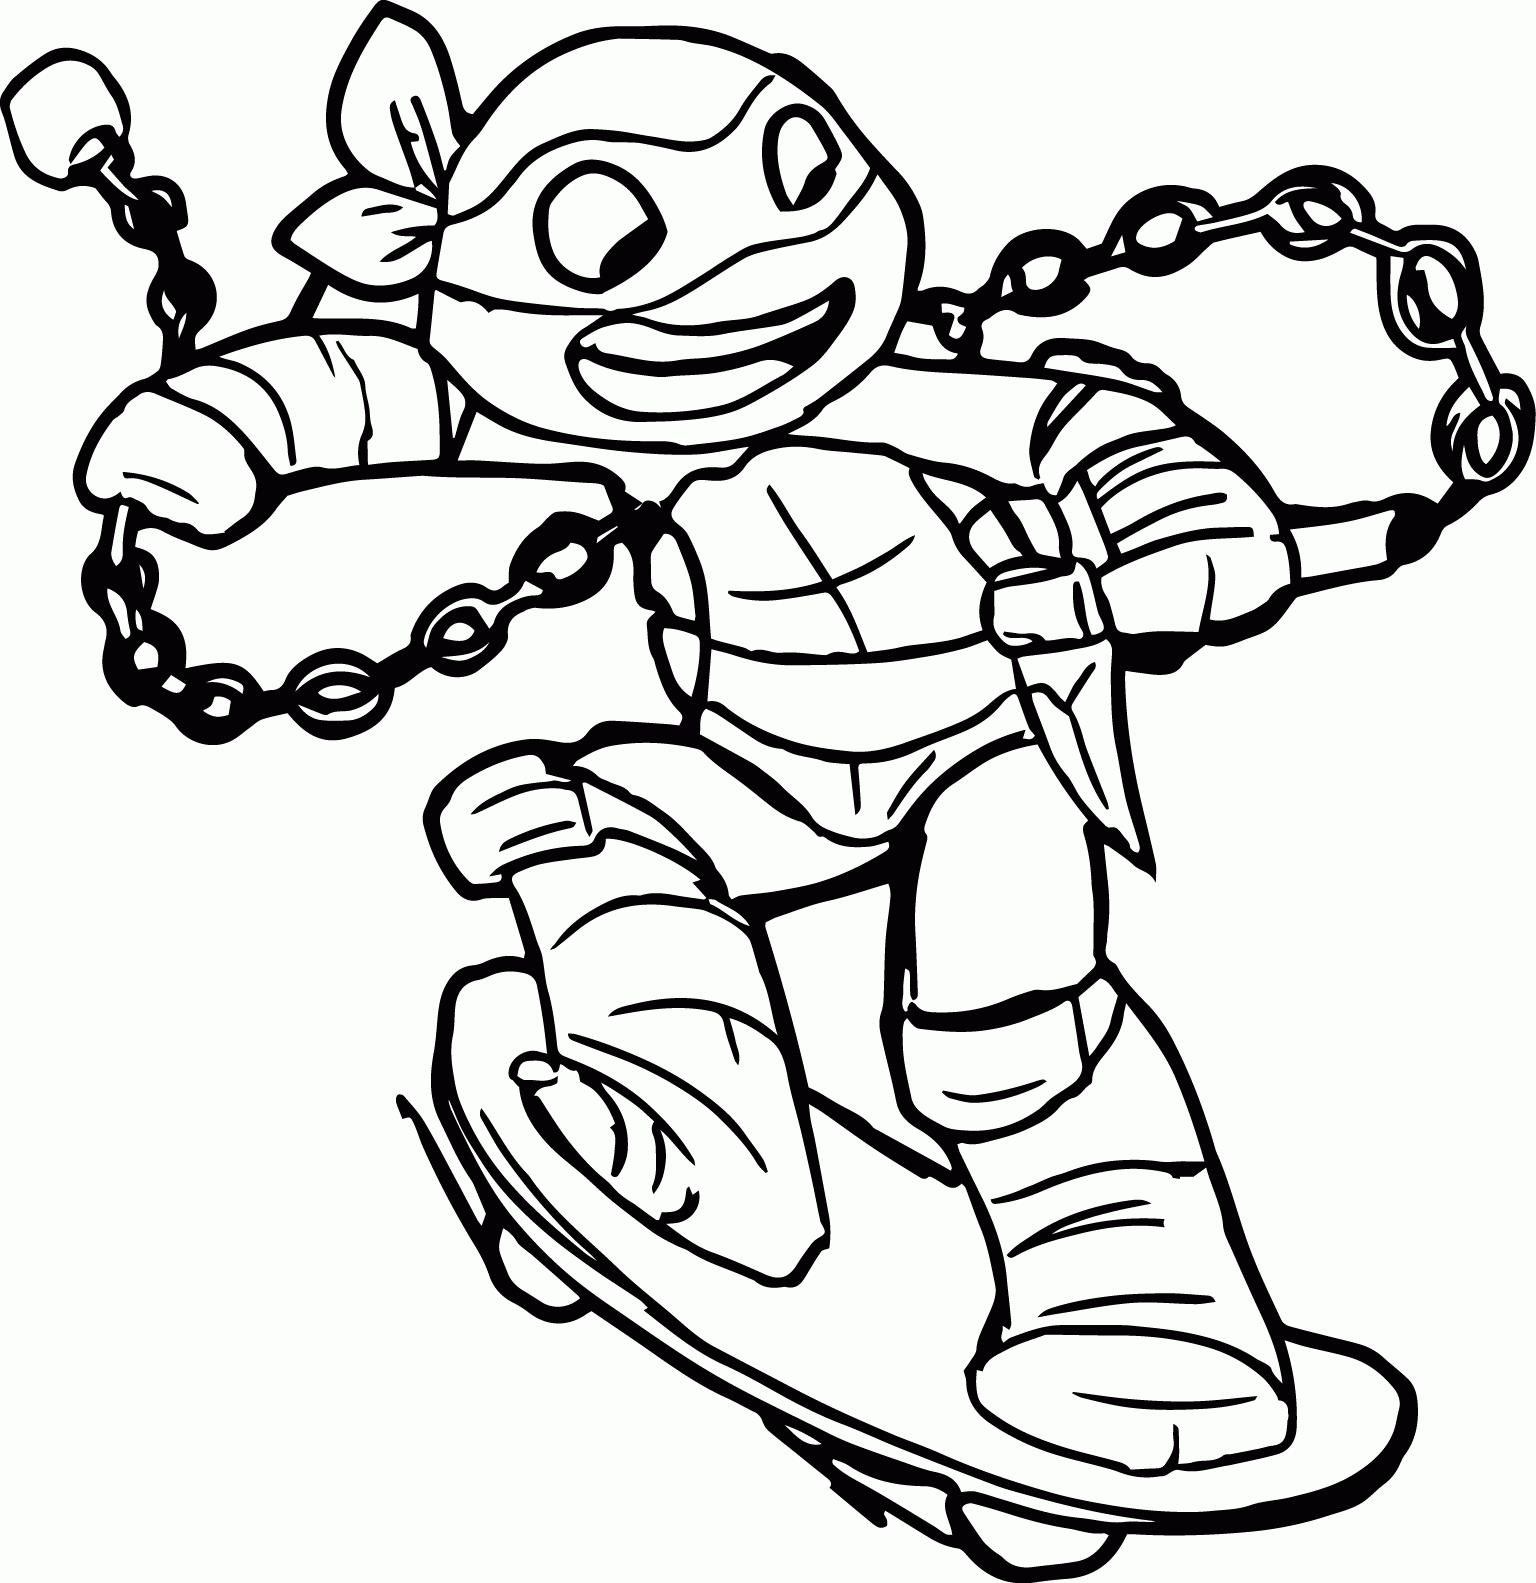 Ninja Turtles Coloring Pages 2016 - High Quality Coloring Pages